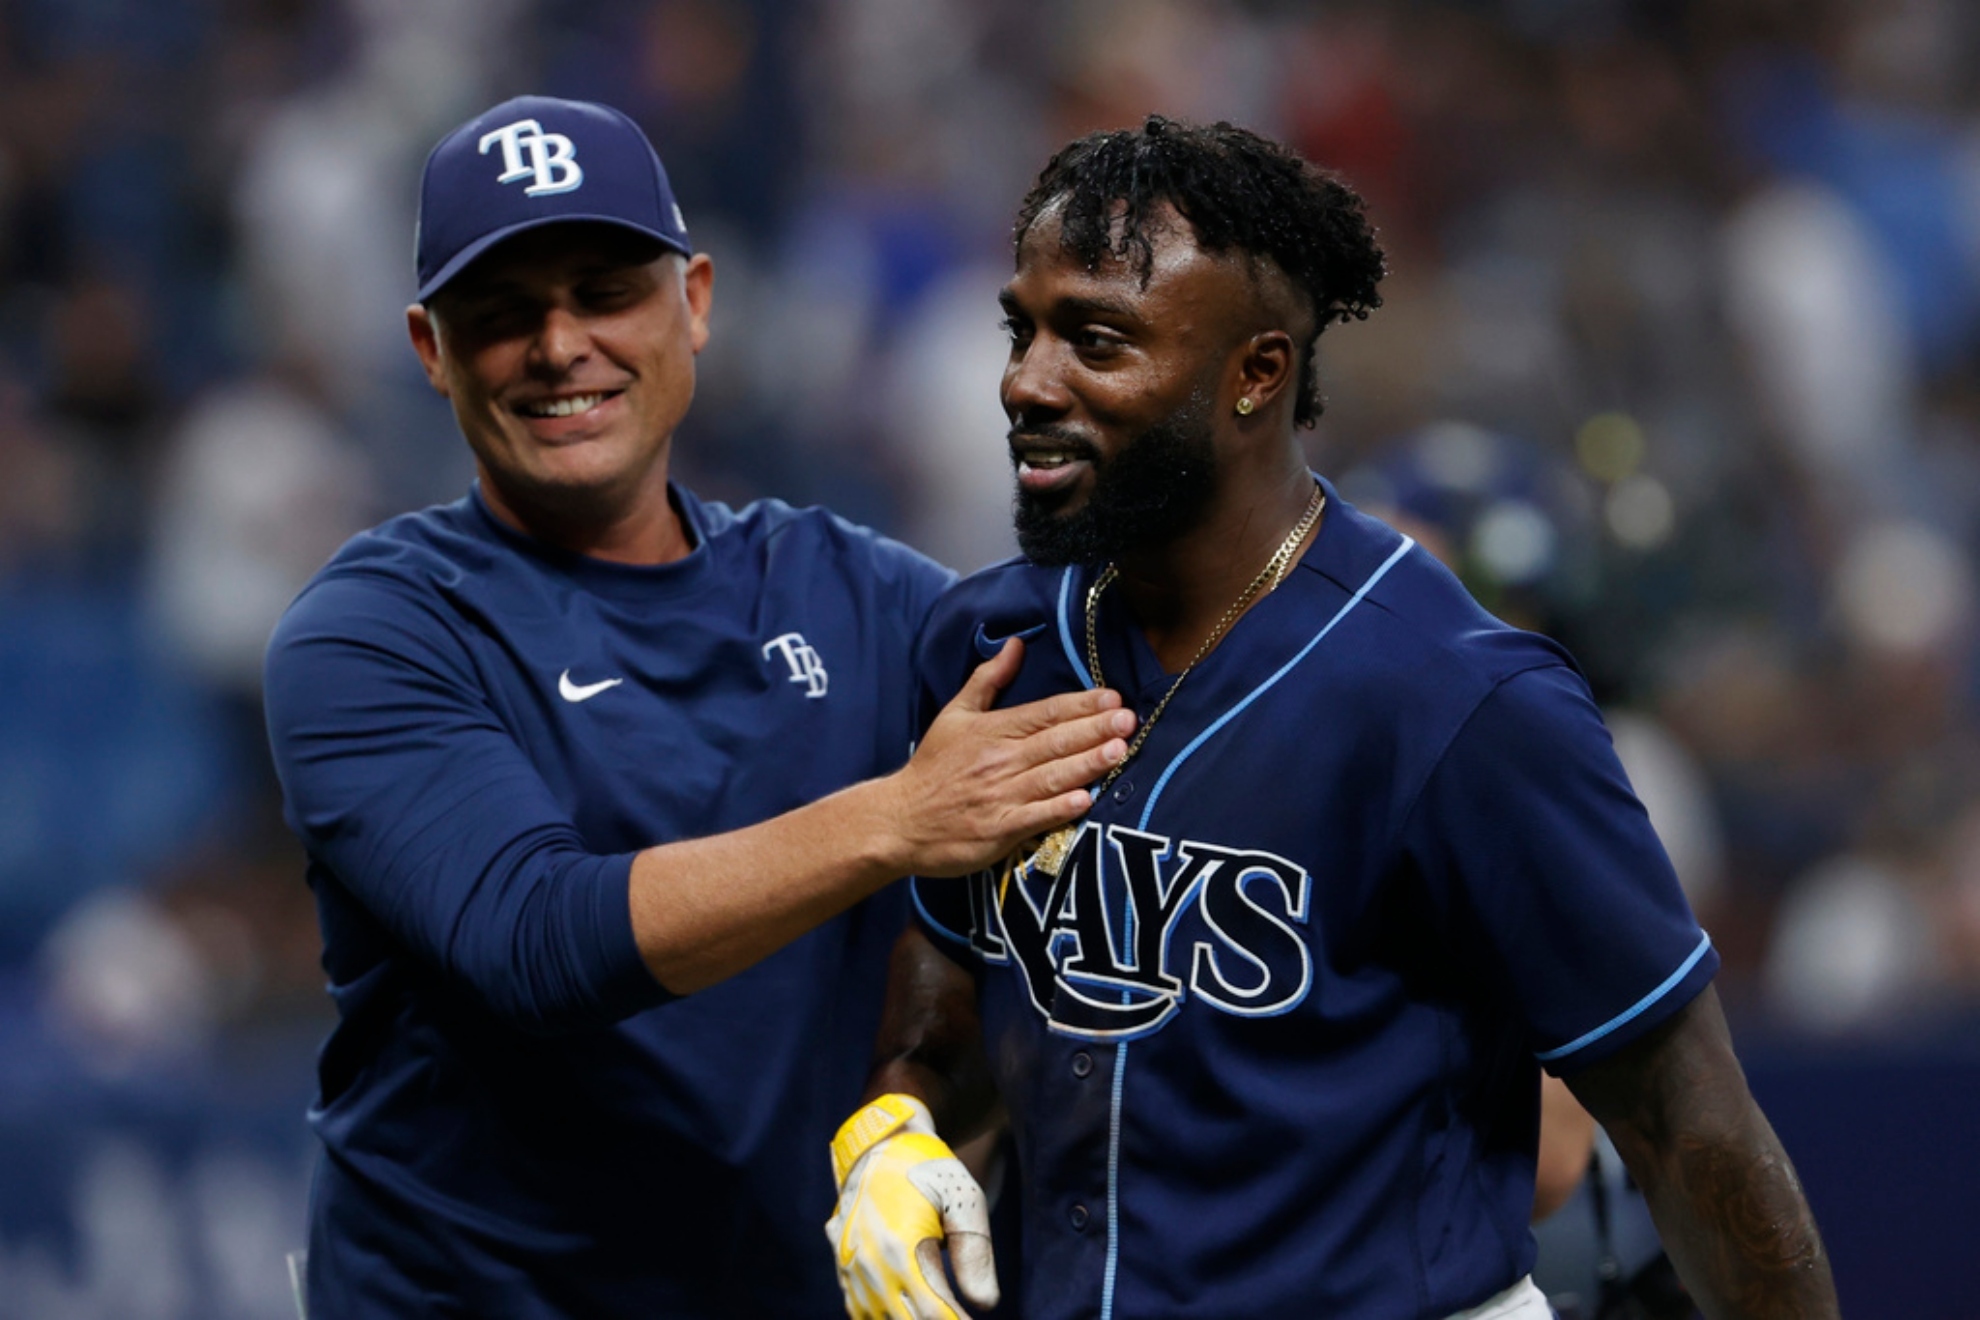 Randy Arozarena and Isaac Paredes lead the Rays win over Astros coining their 20th victory